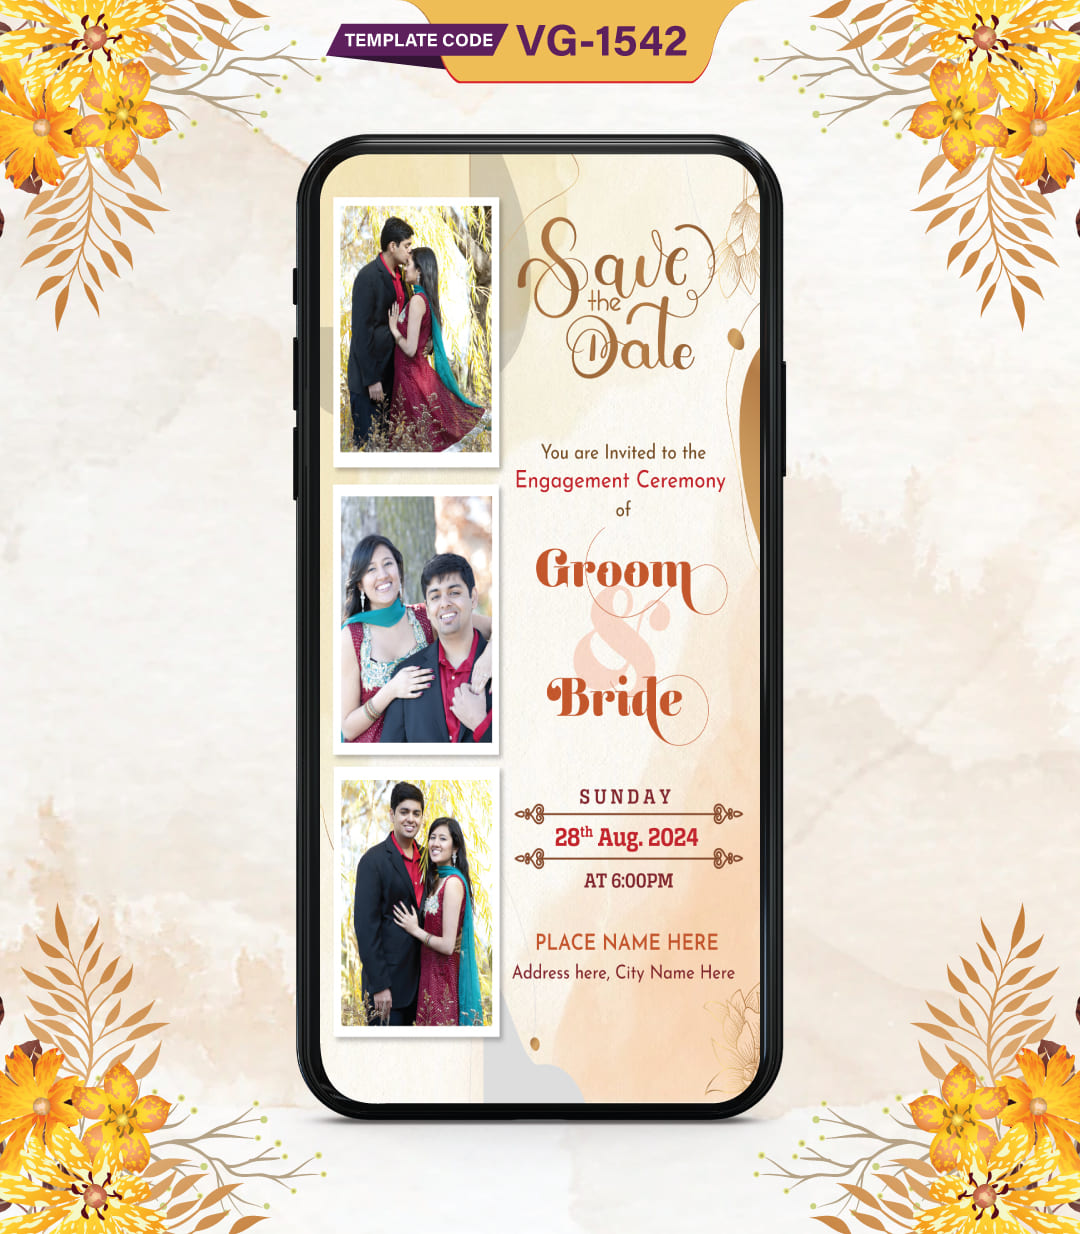 Engagement Invitation Card With Couple Photo